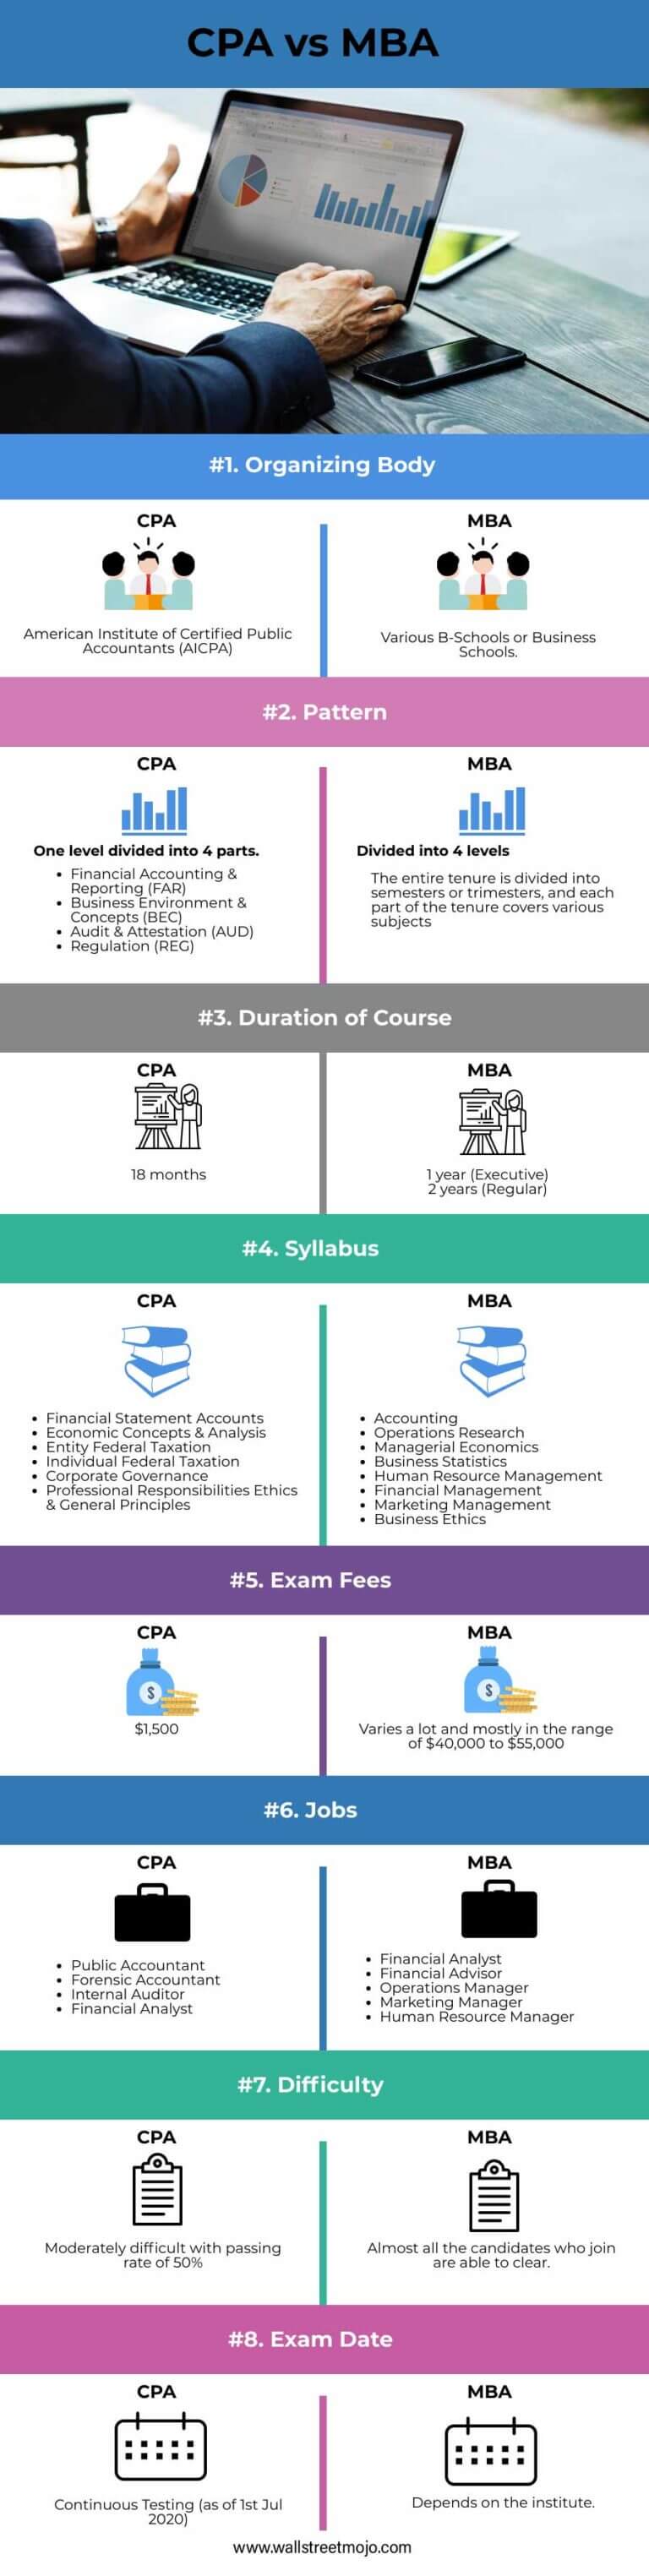 CPA vs MBA Top 8 Differences (Updated for 2021)